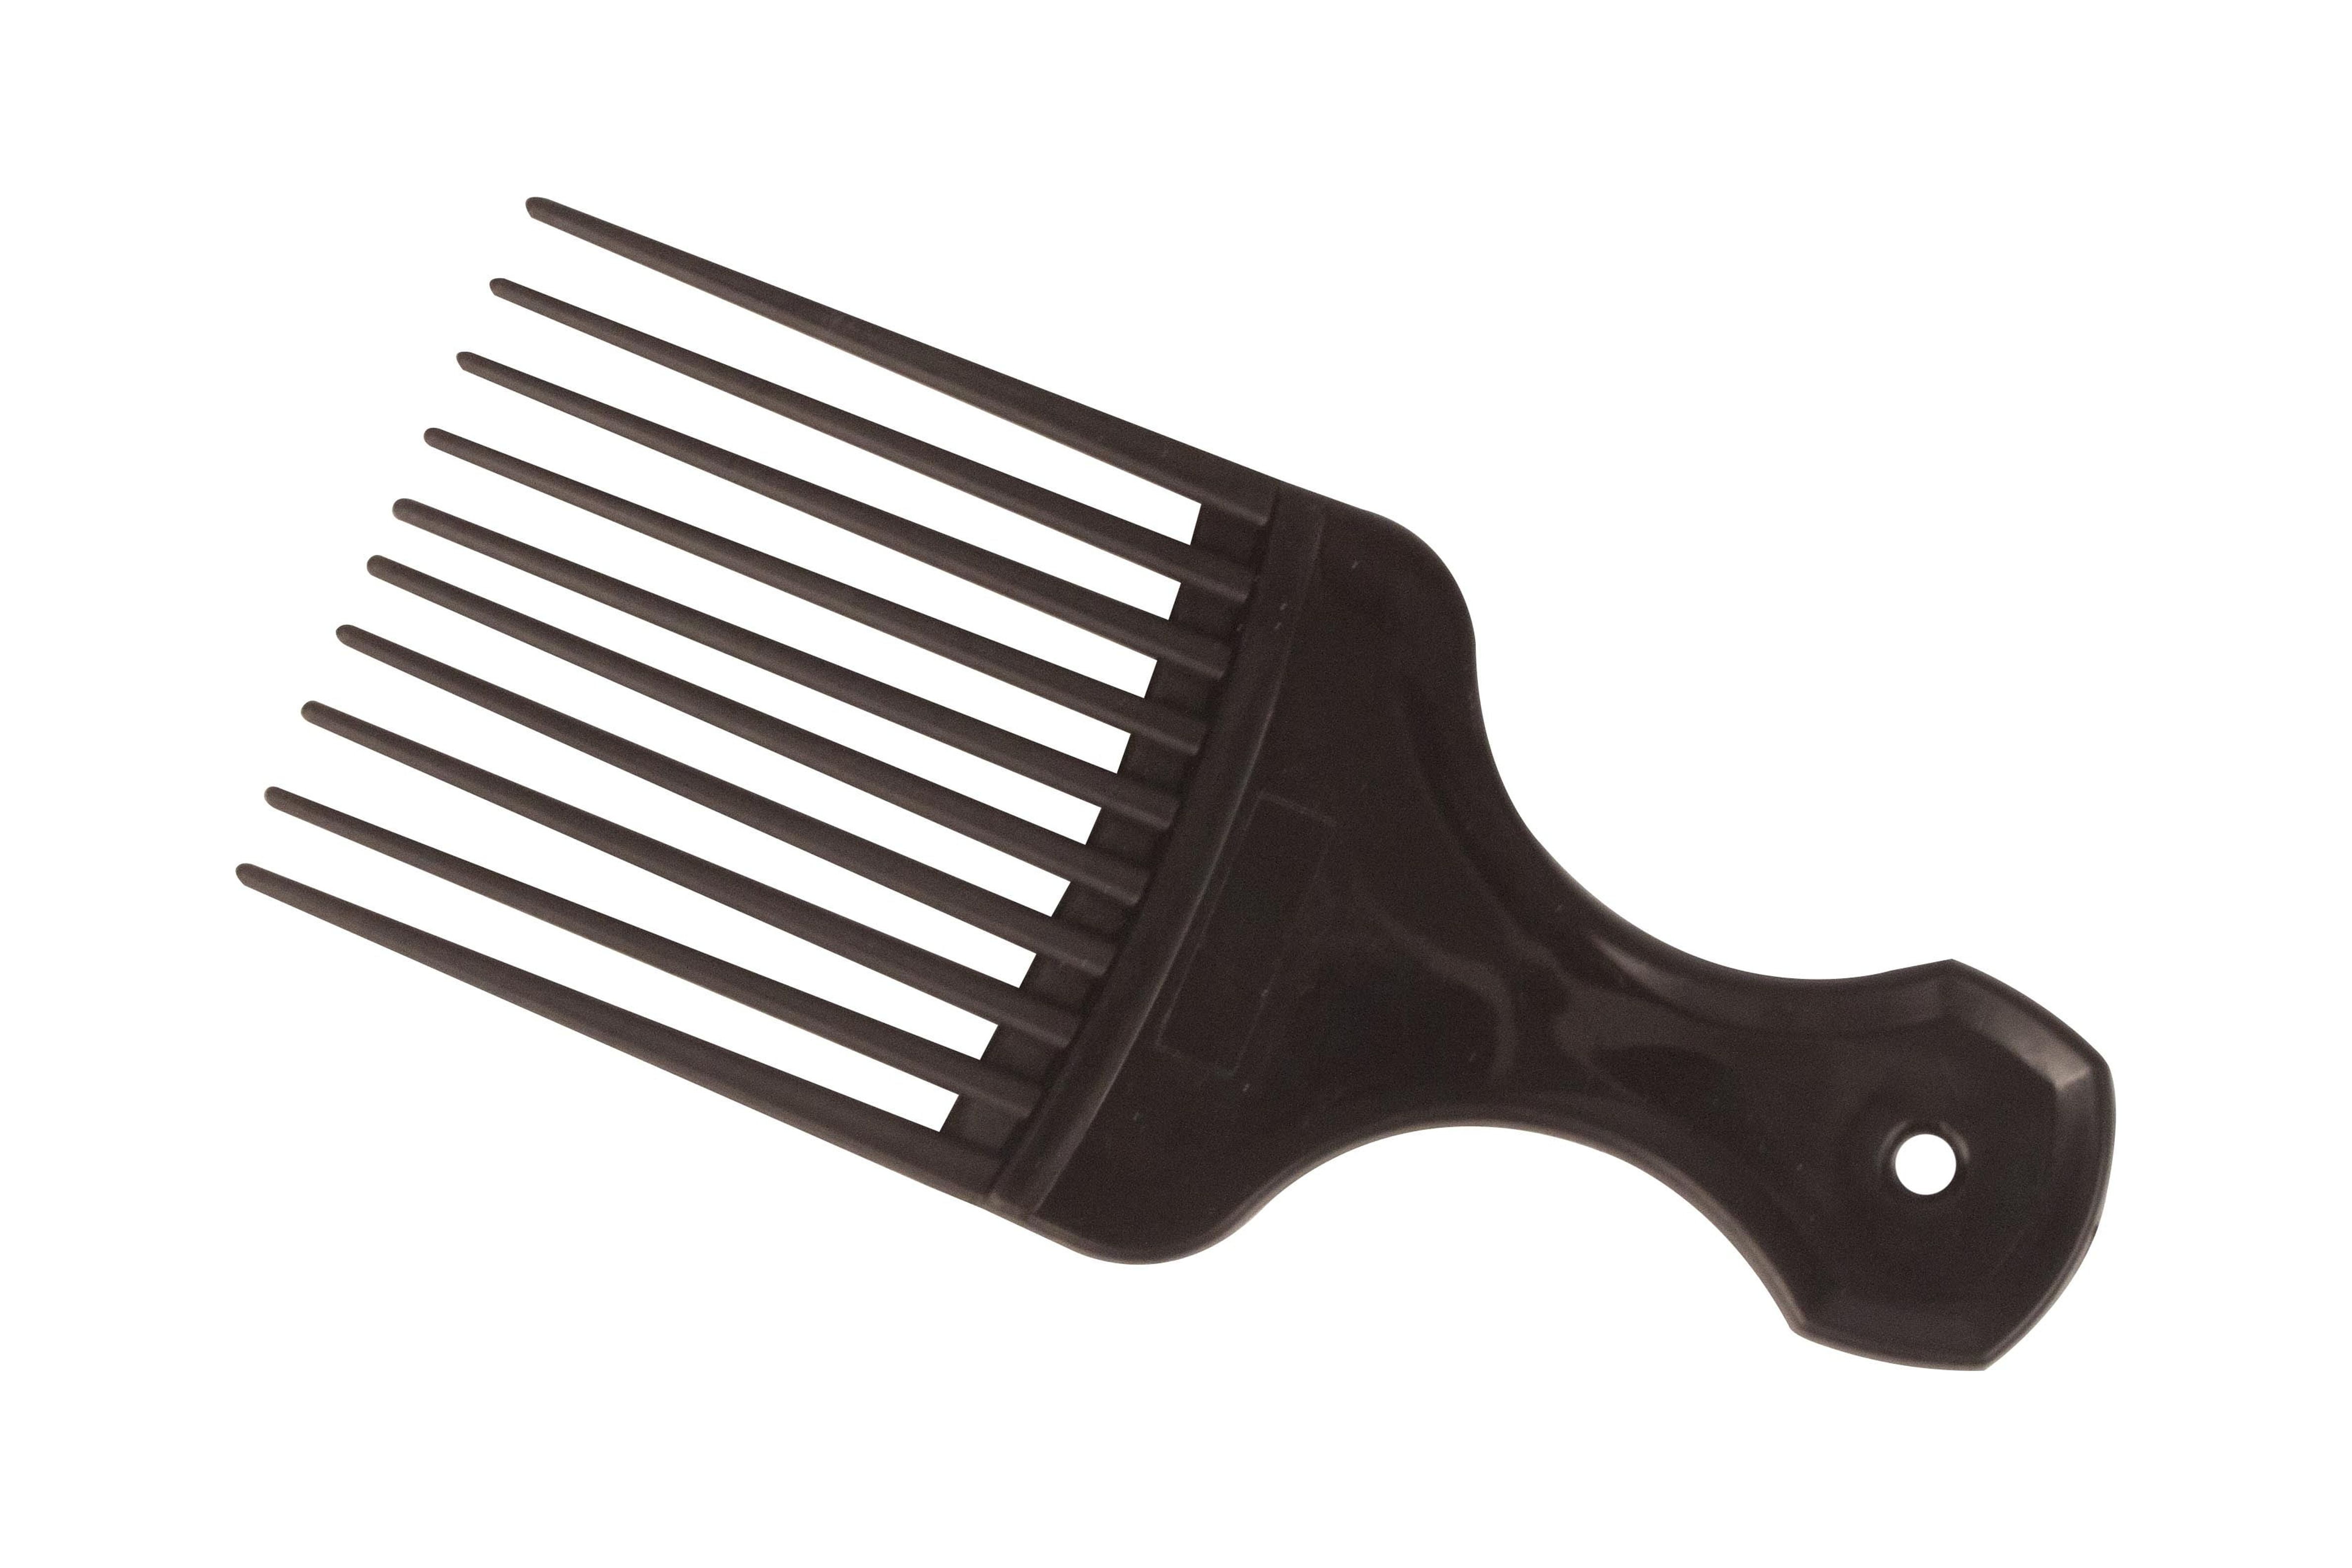 Afro Comb Hair Pick With Handle ALL BLACK For Styling Hair & Detangle